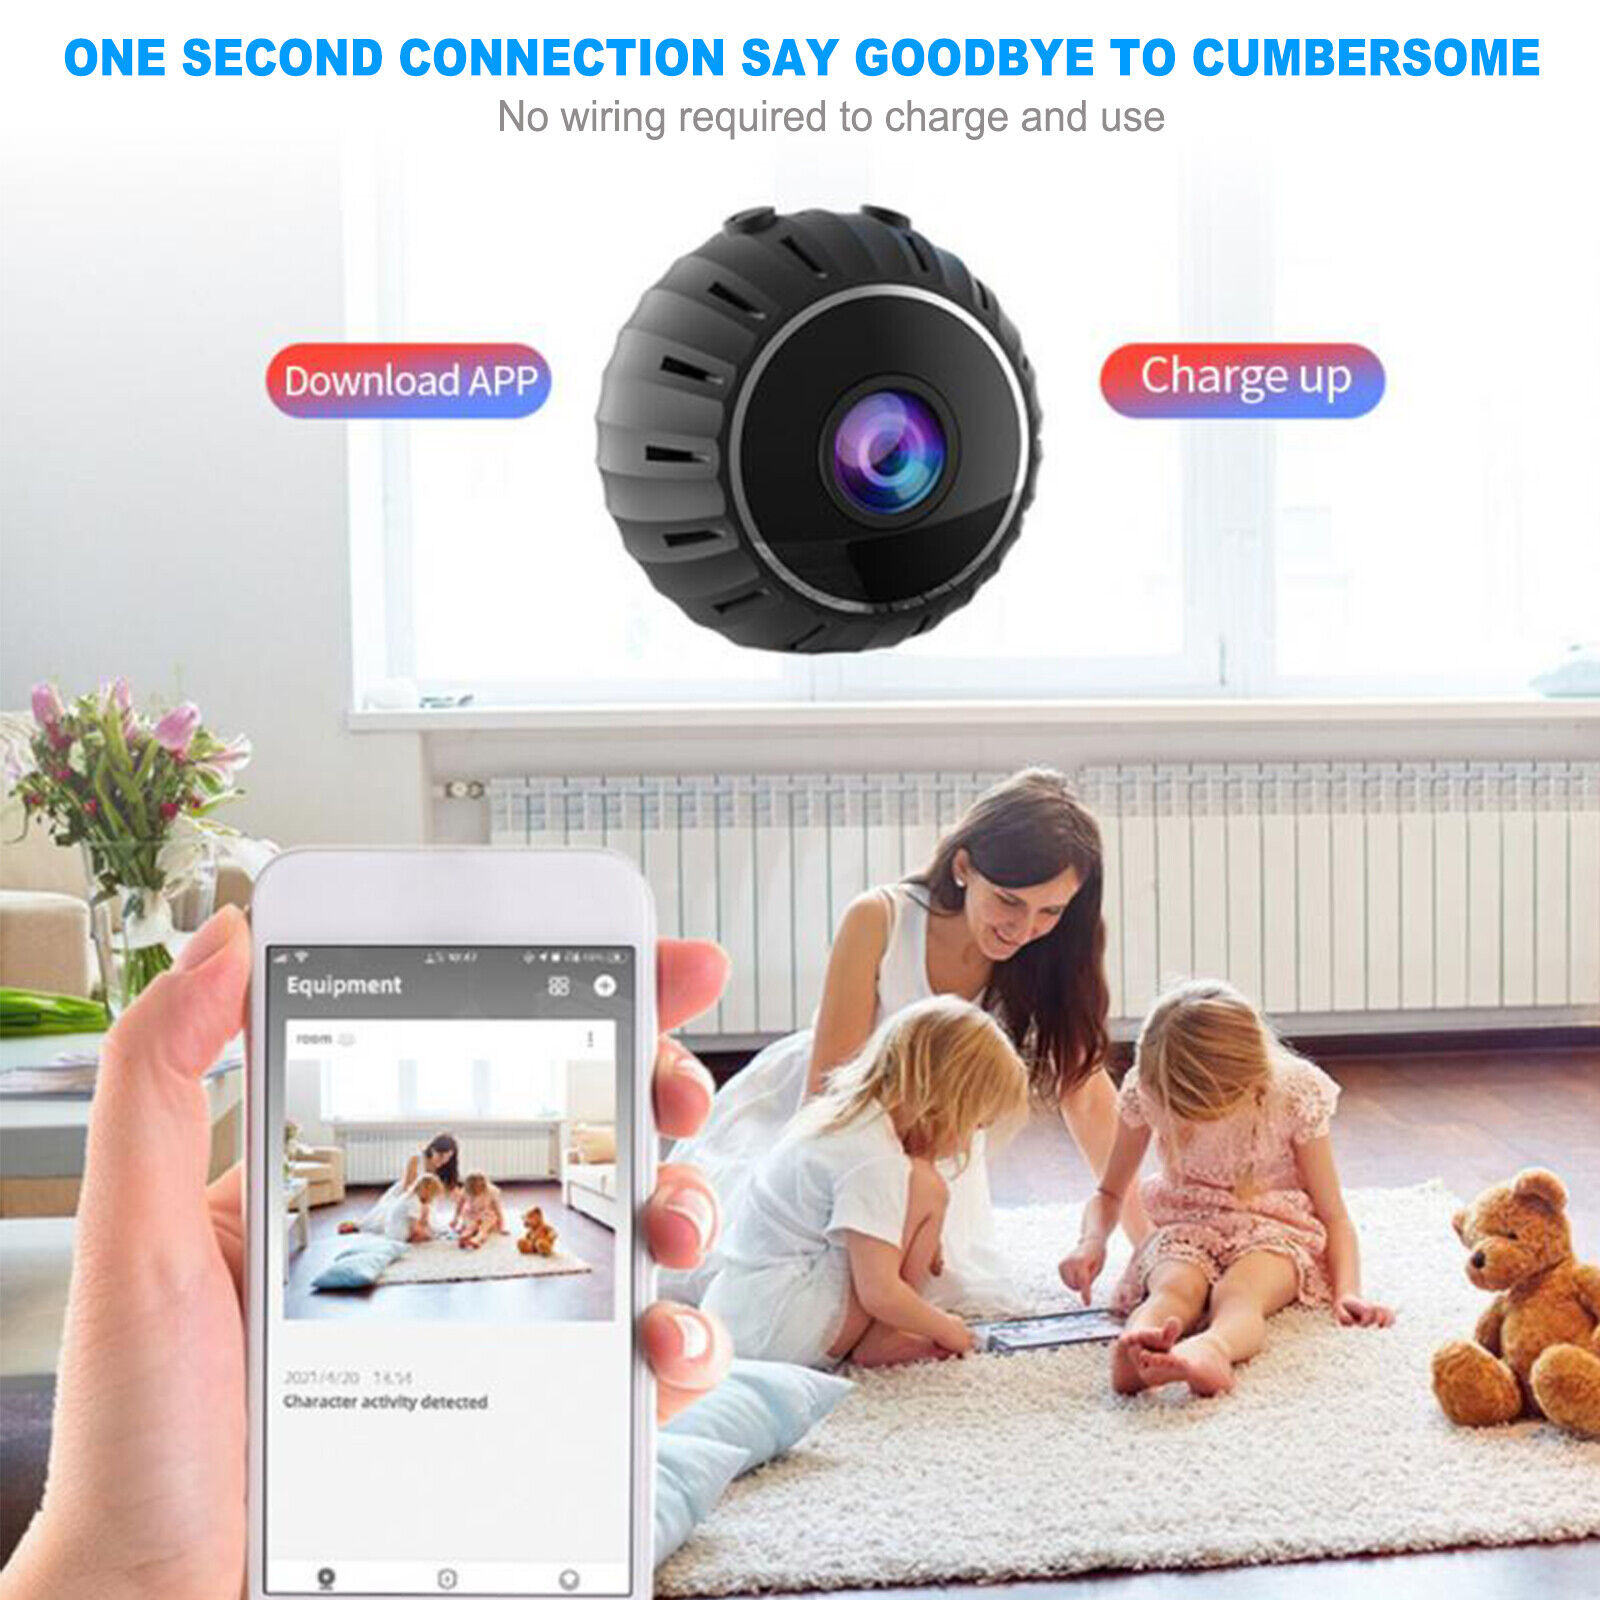 Security-Cameras-Mini-Camera-for-Home-Security-1080p-HD-Mini-IR-Camera-WiFi-Wireless-Small-Indoor-Nanny-Camera-Cell-Phone-APP-Control-with-A-Wide-Angle-Remote-View-22